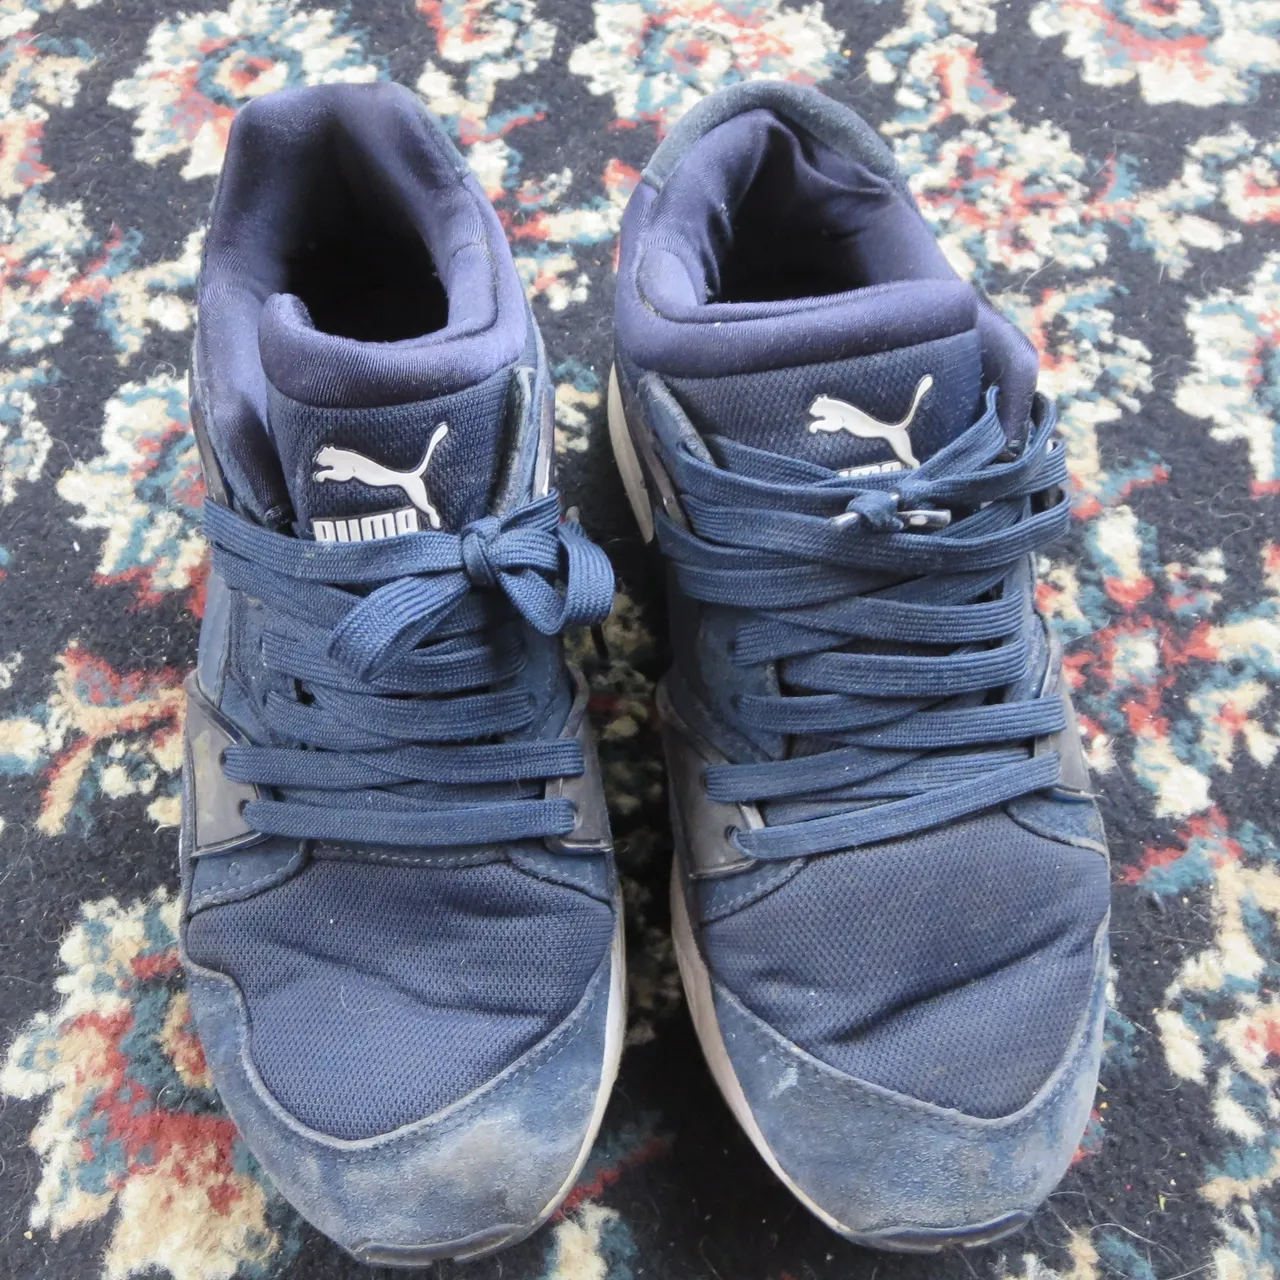 Puma Navy Blue 7.5 Running Shoes - Excellent Condition photo 3